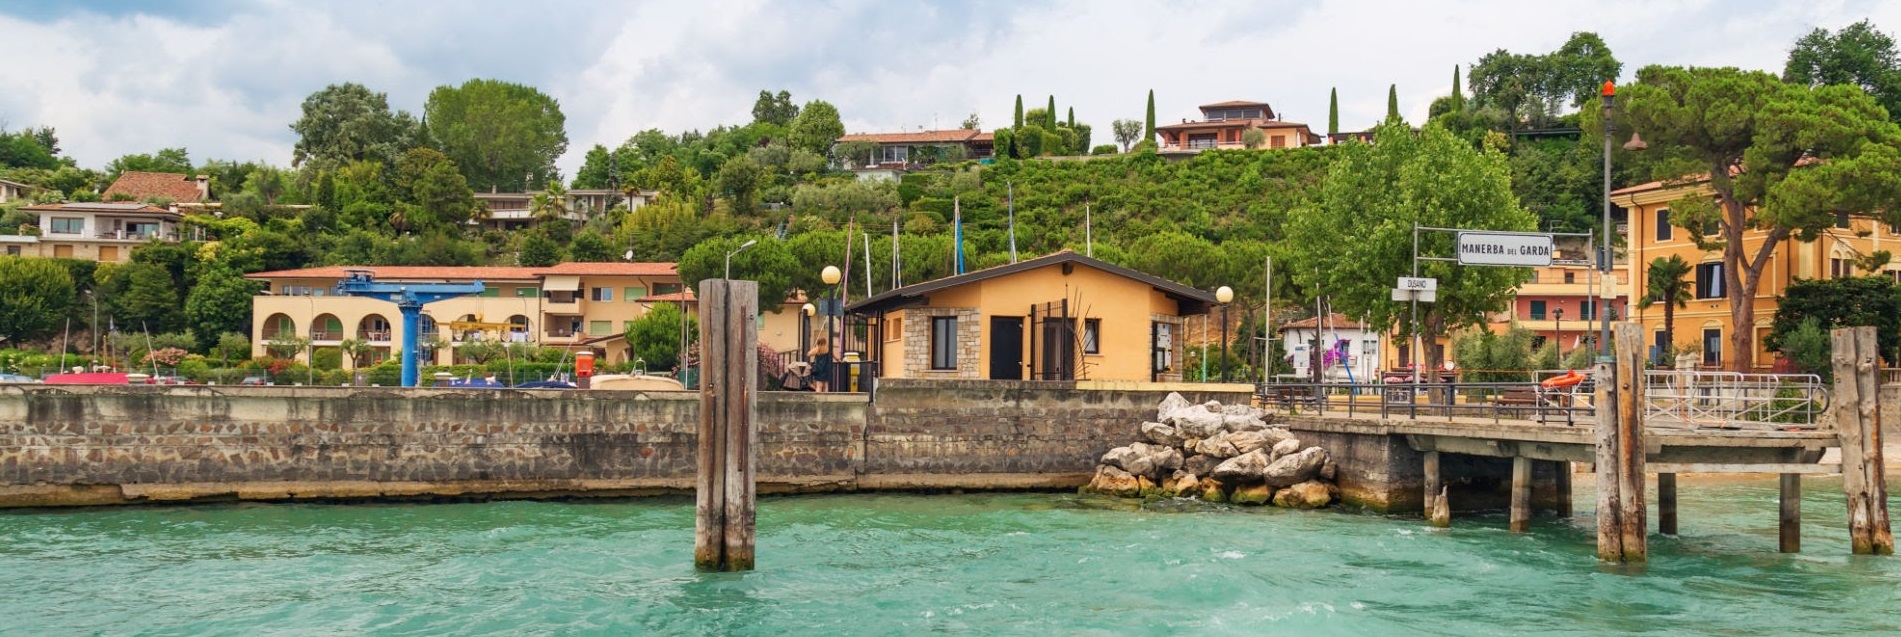 Small wooden pier city of Manerba del Garda is a quiet resort town on the Western shore of lake Garda. The view from the water on small Italian city.